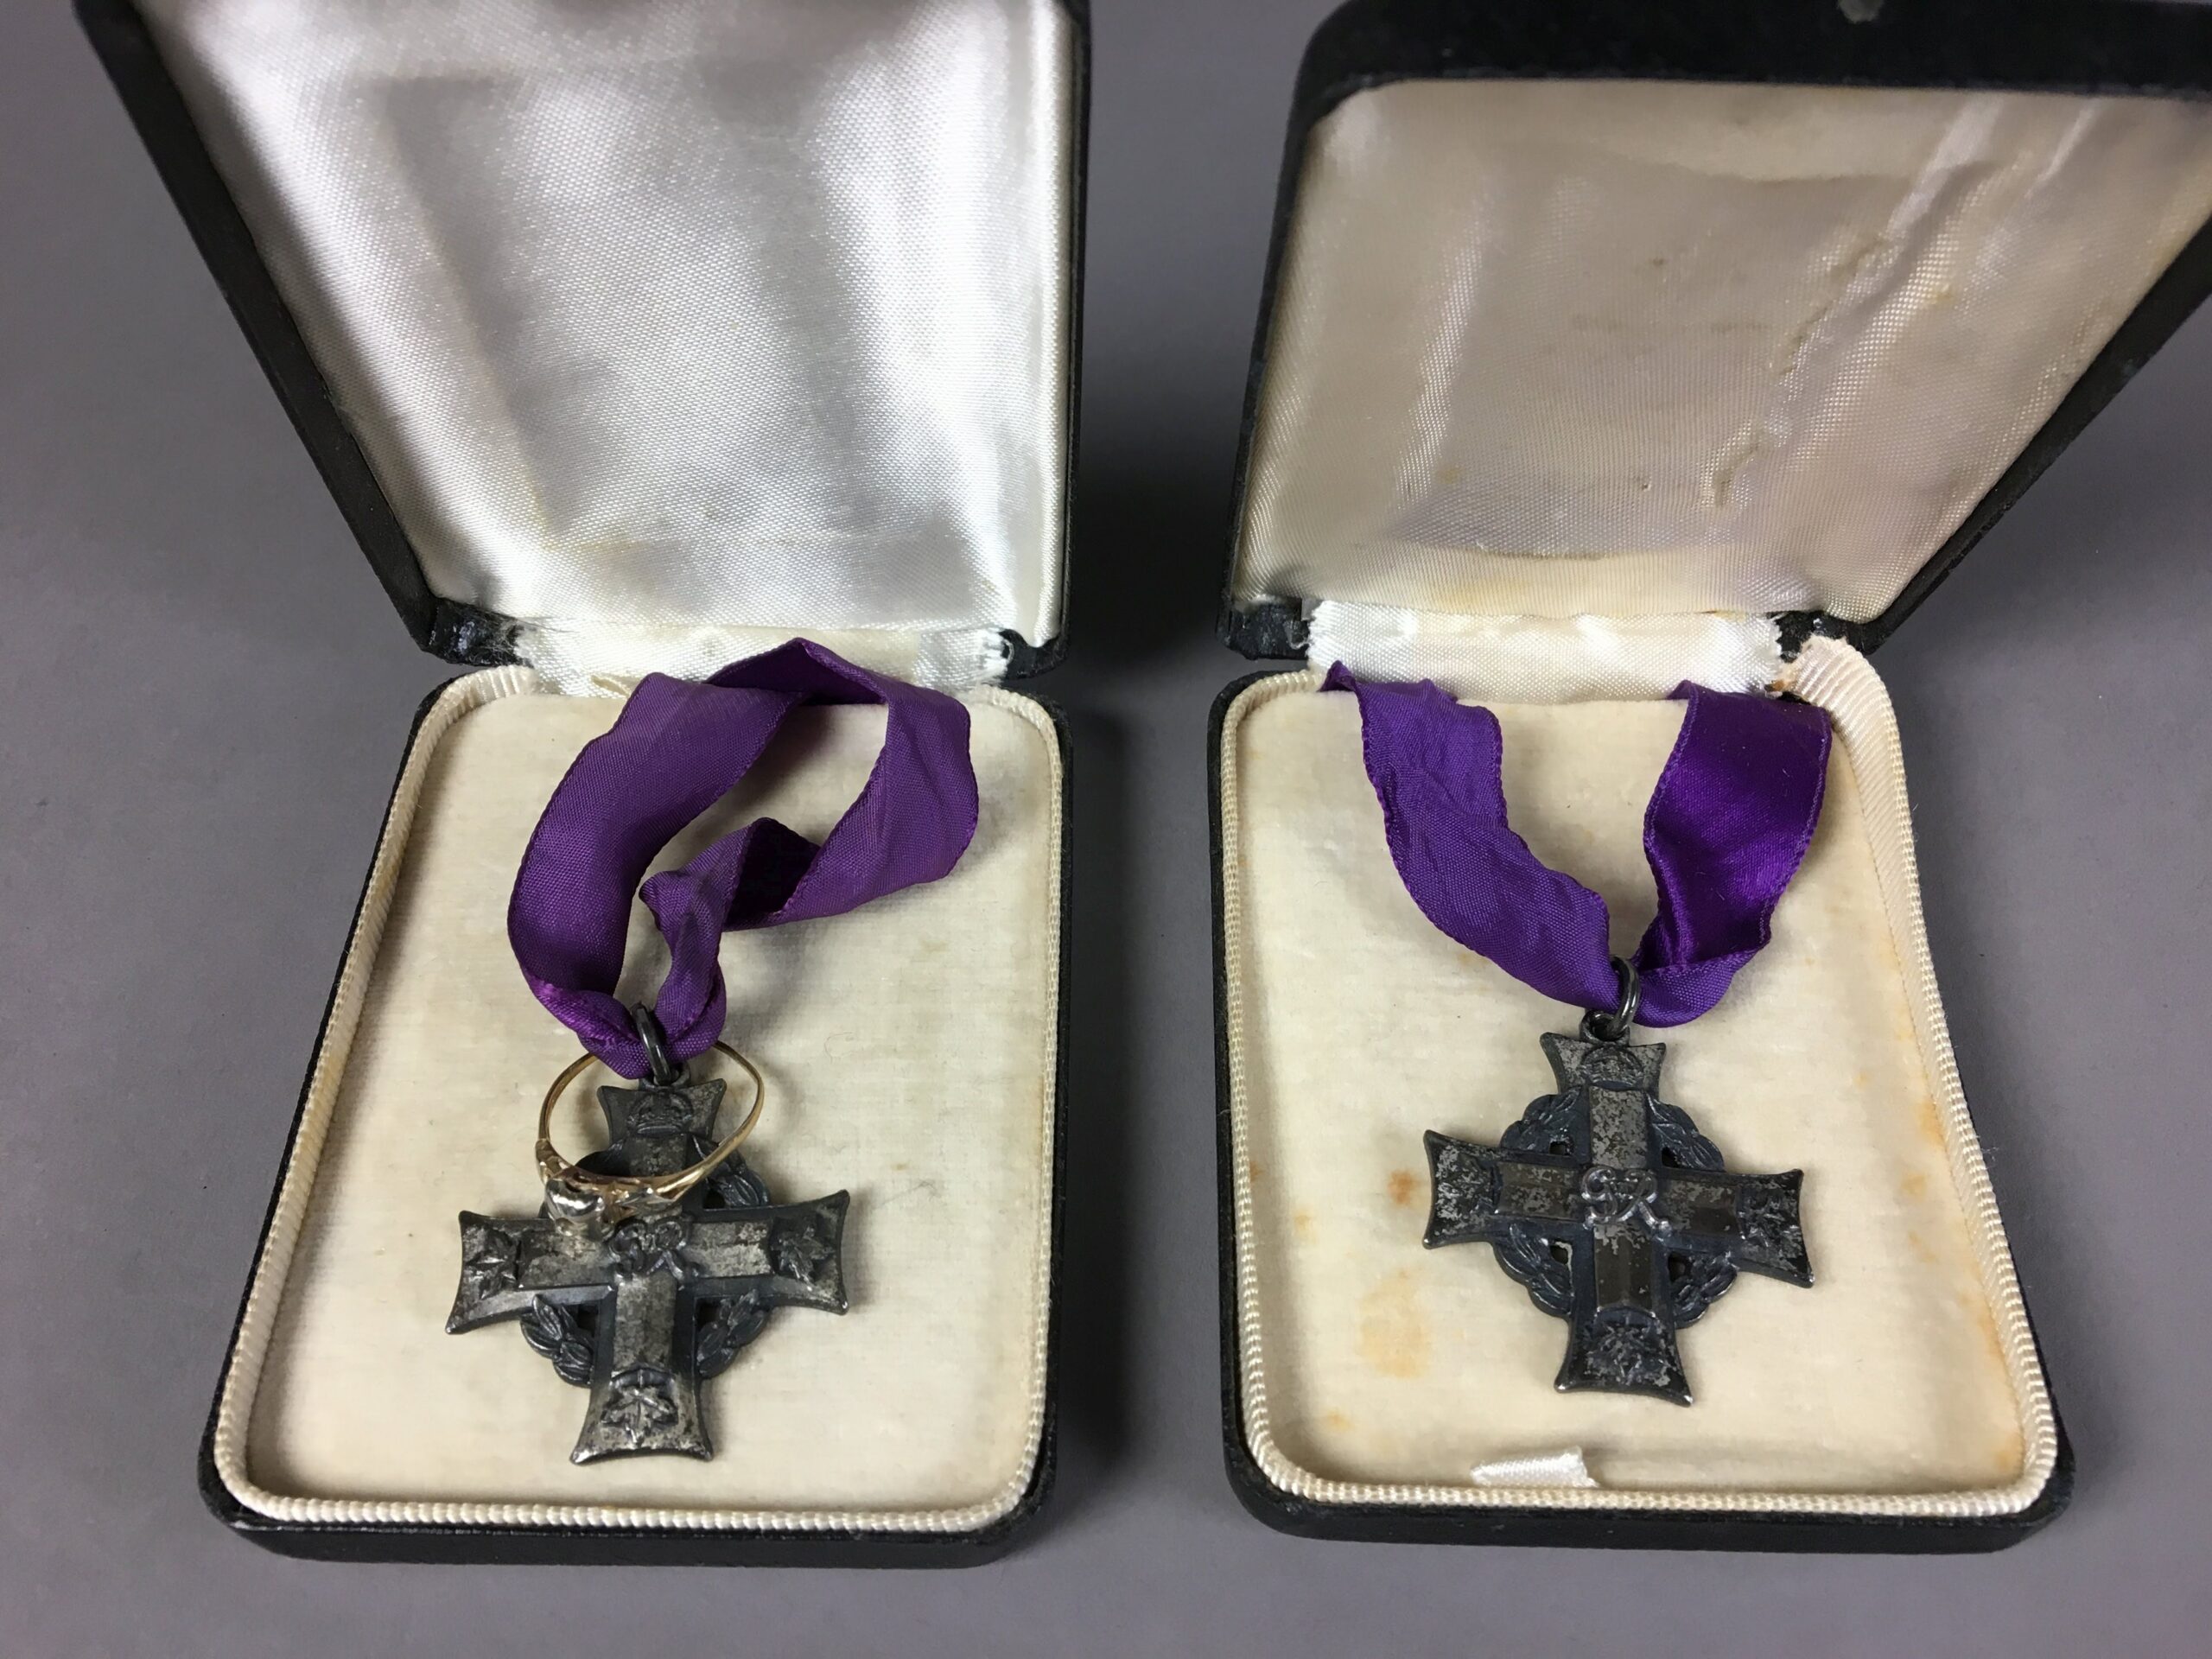 Two Memorial Cross medals on purple ribbons each in a medal box. The medal on the left has an engagement ring fastened to the ribbon.